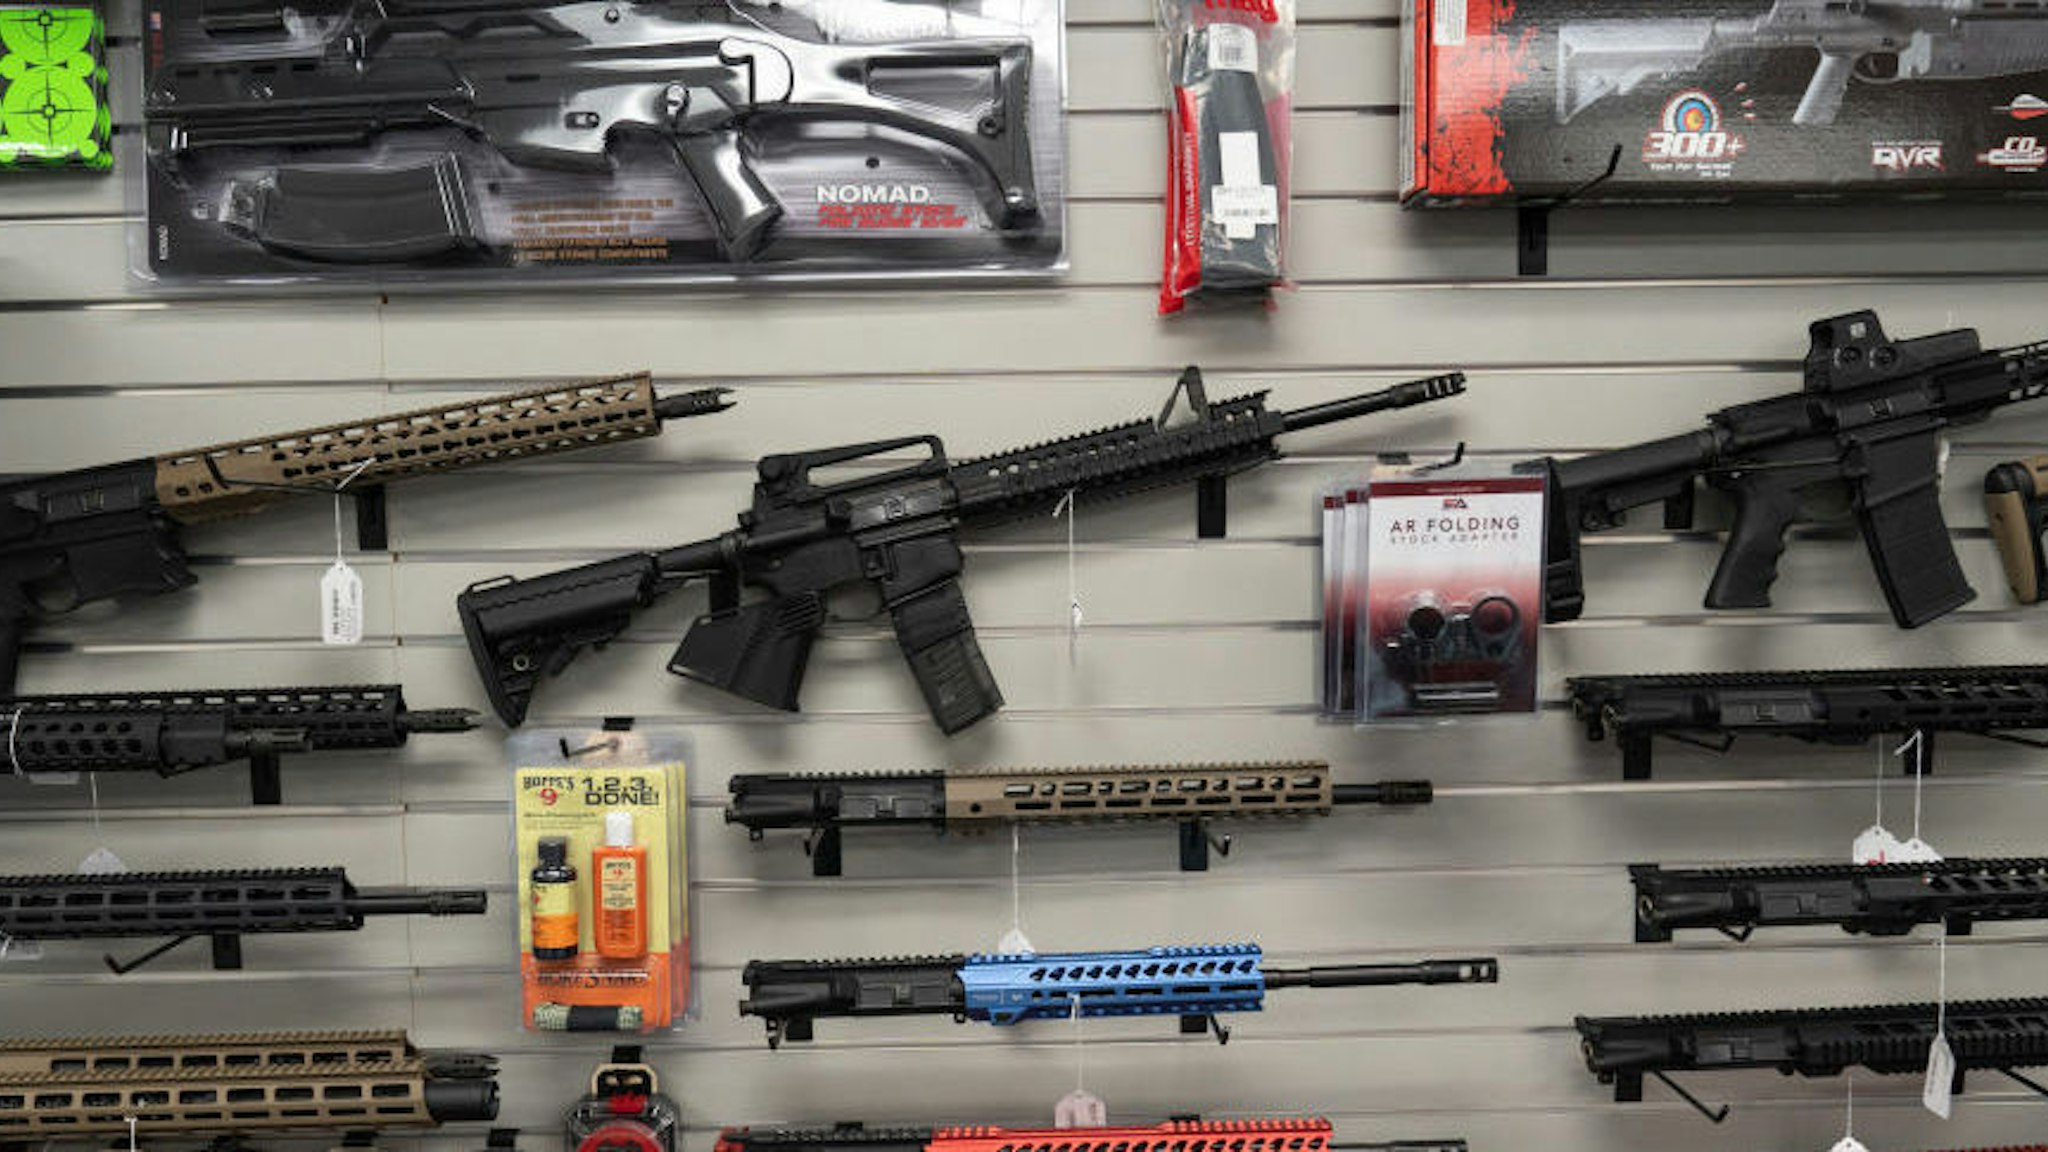 California-compliant AR-15 upper receivers, rifles, and gun accessories for sale at Hiram's Guns / Firearms Unknown store in El Cajon, California, U.S., on Monday, April 26, 2021. President Joe Biden's planned executive actions would crack down on "ghost guns," which can be assembled from kits and are not traceable by law enforcement because they lack serial numbers, as well as braces for pistols that make firearms more stable and accurate.